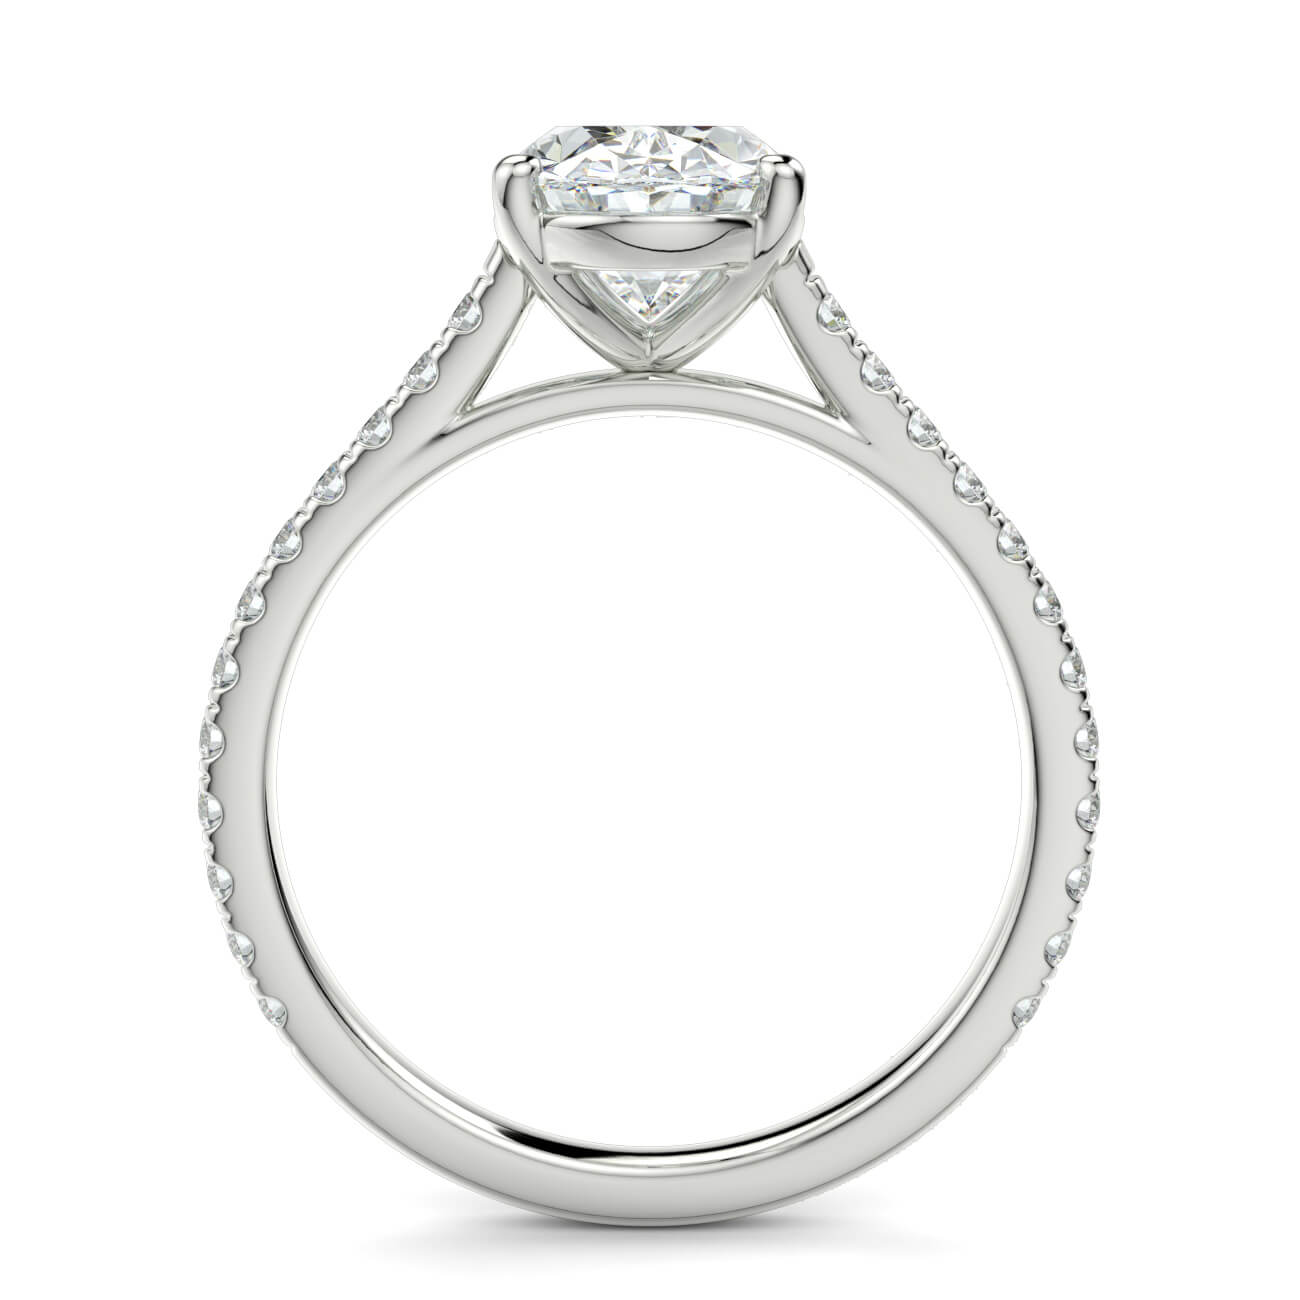 Oval shape diamond cathedral engagement ring in white gold – Australian Diamond Network